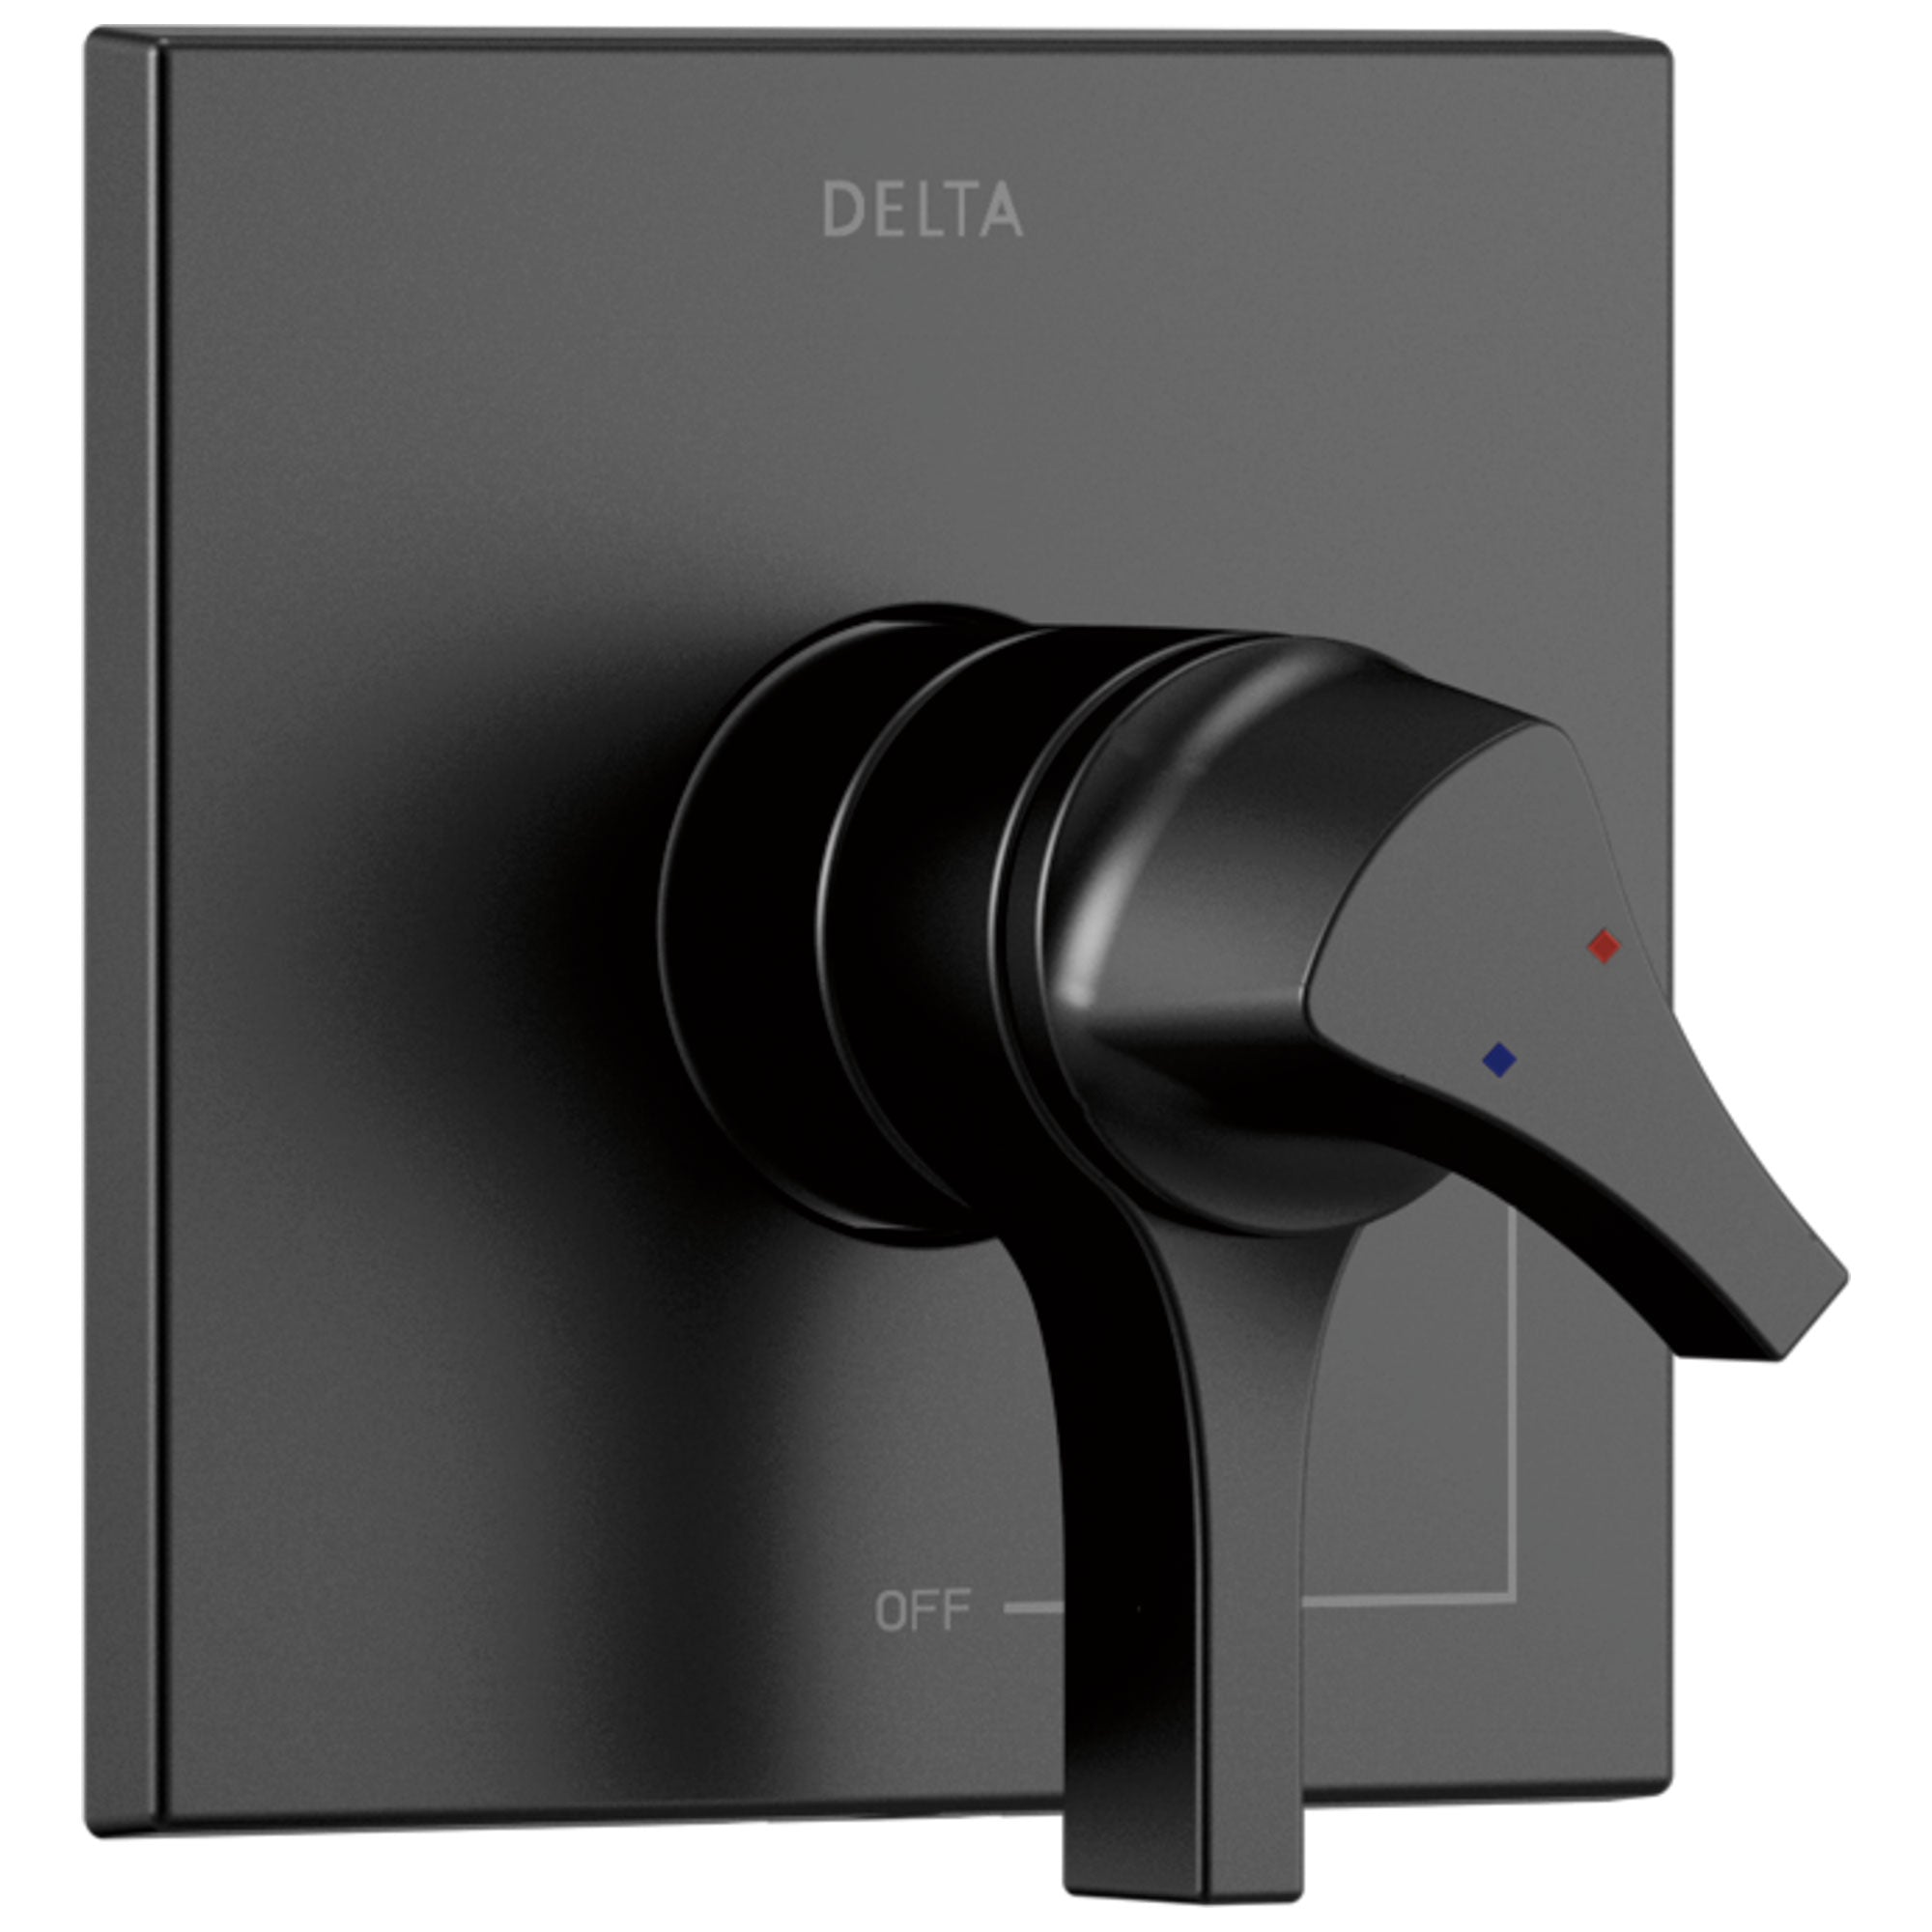 Delta Zura Matte Black Finish Monitor 17 Series Shower Faucet Control Only Includes Cartridge, Handles, and Valve with Stops D3410V